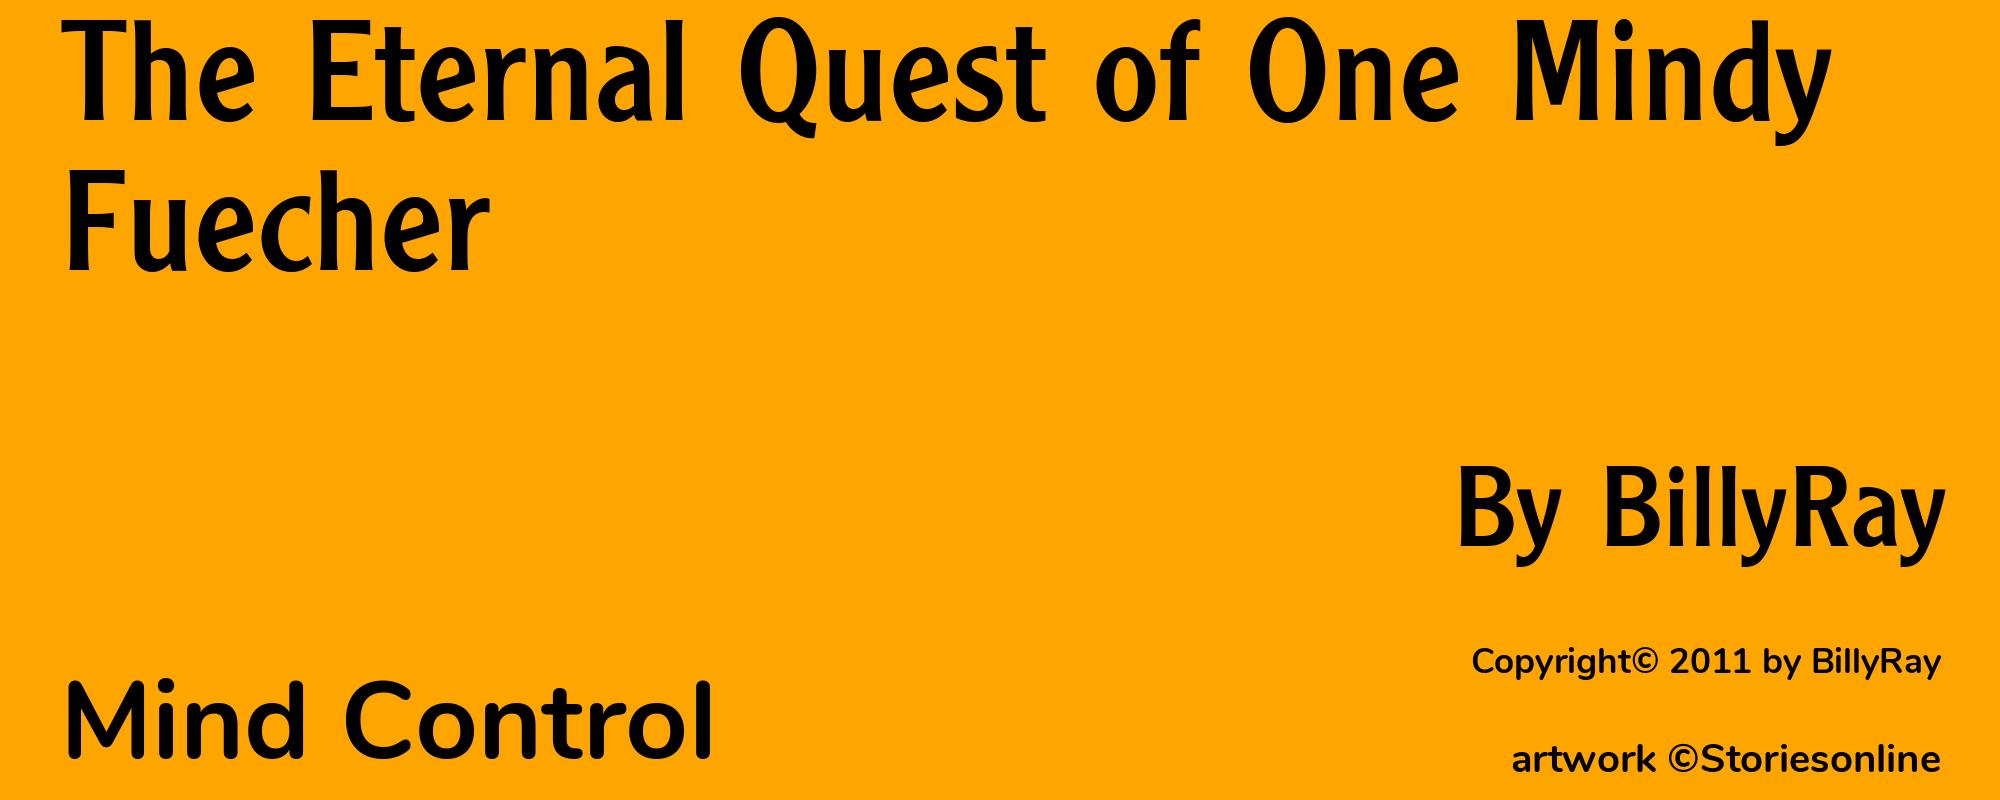 The Eternal Quest of One Mindy Fuecher - Cover